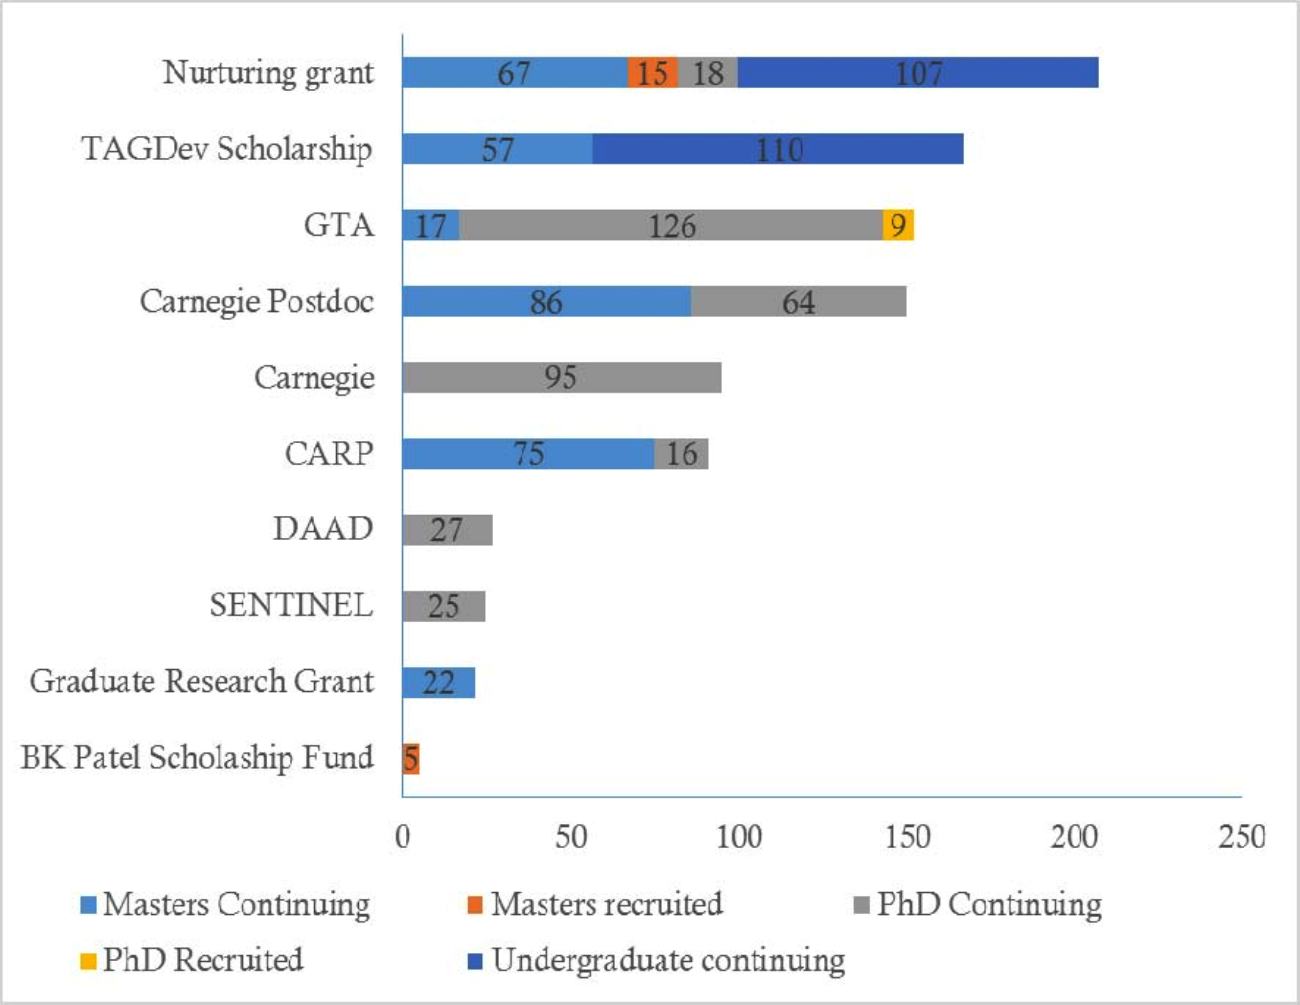 Number of Continuing students supported under the different granting portfolios of RUFORUM, Quarterly Report April-June 2021.